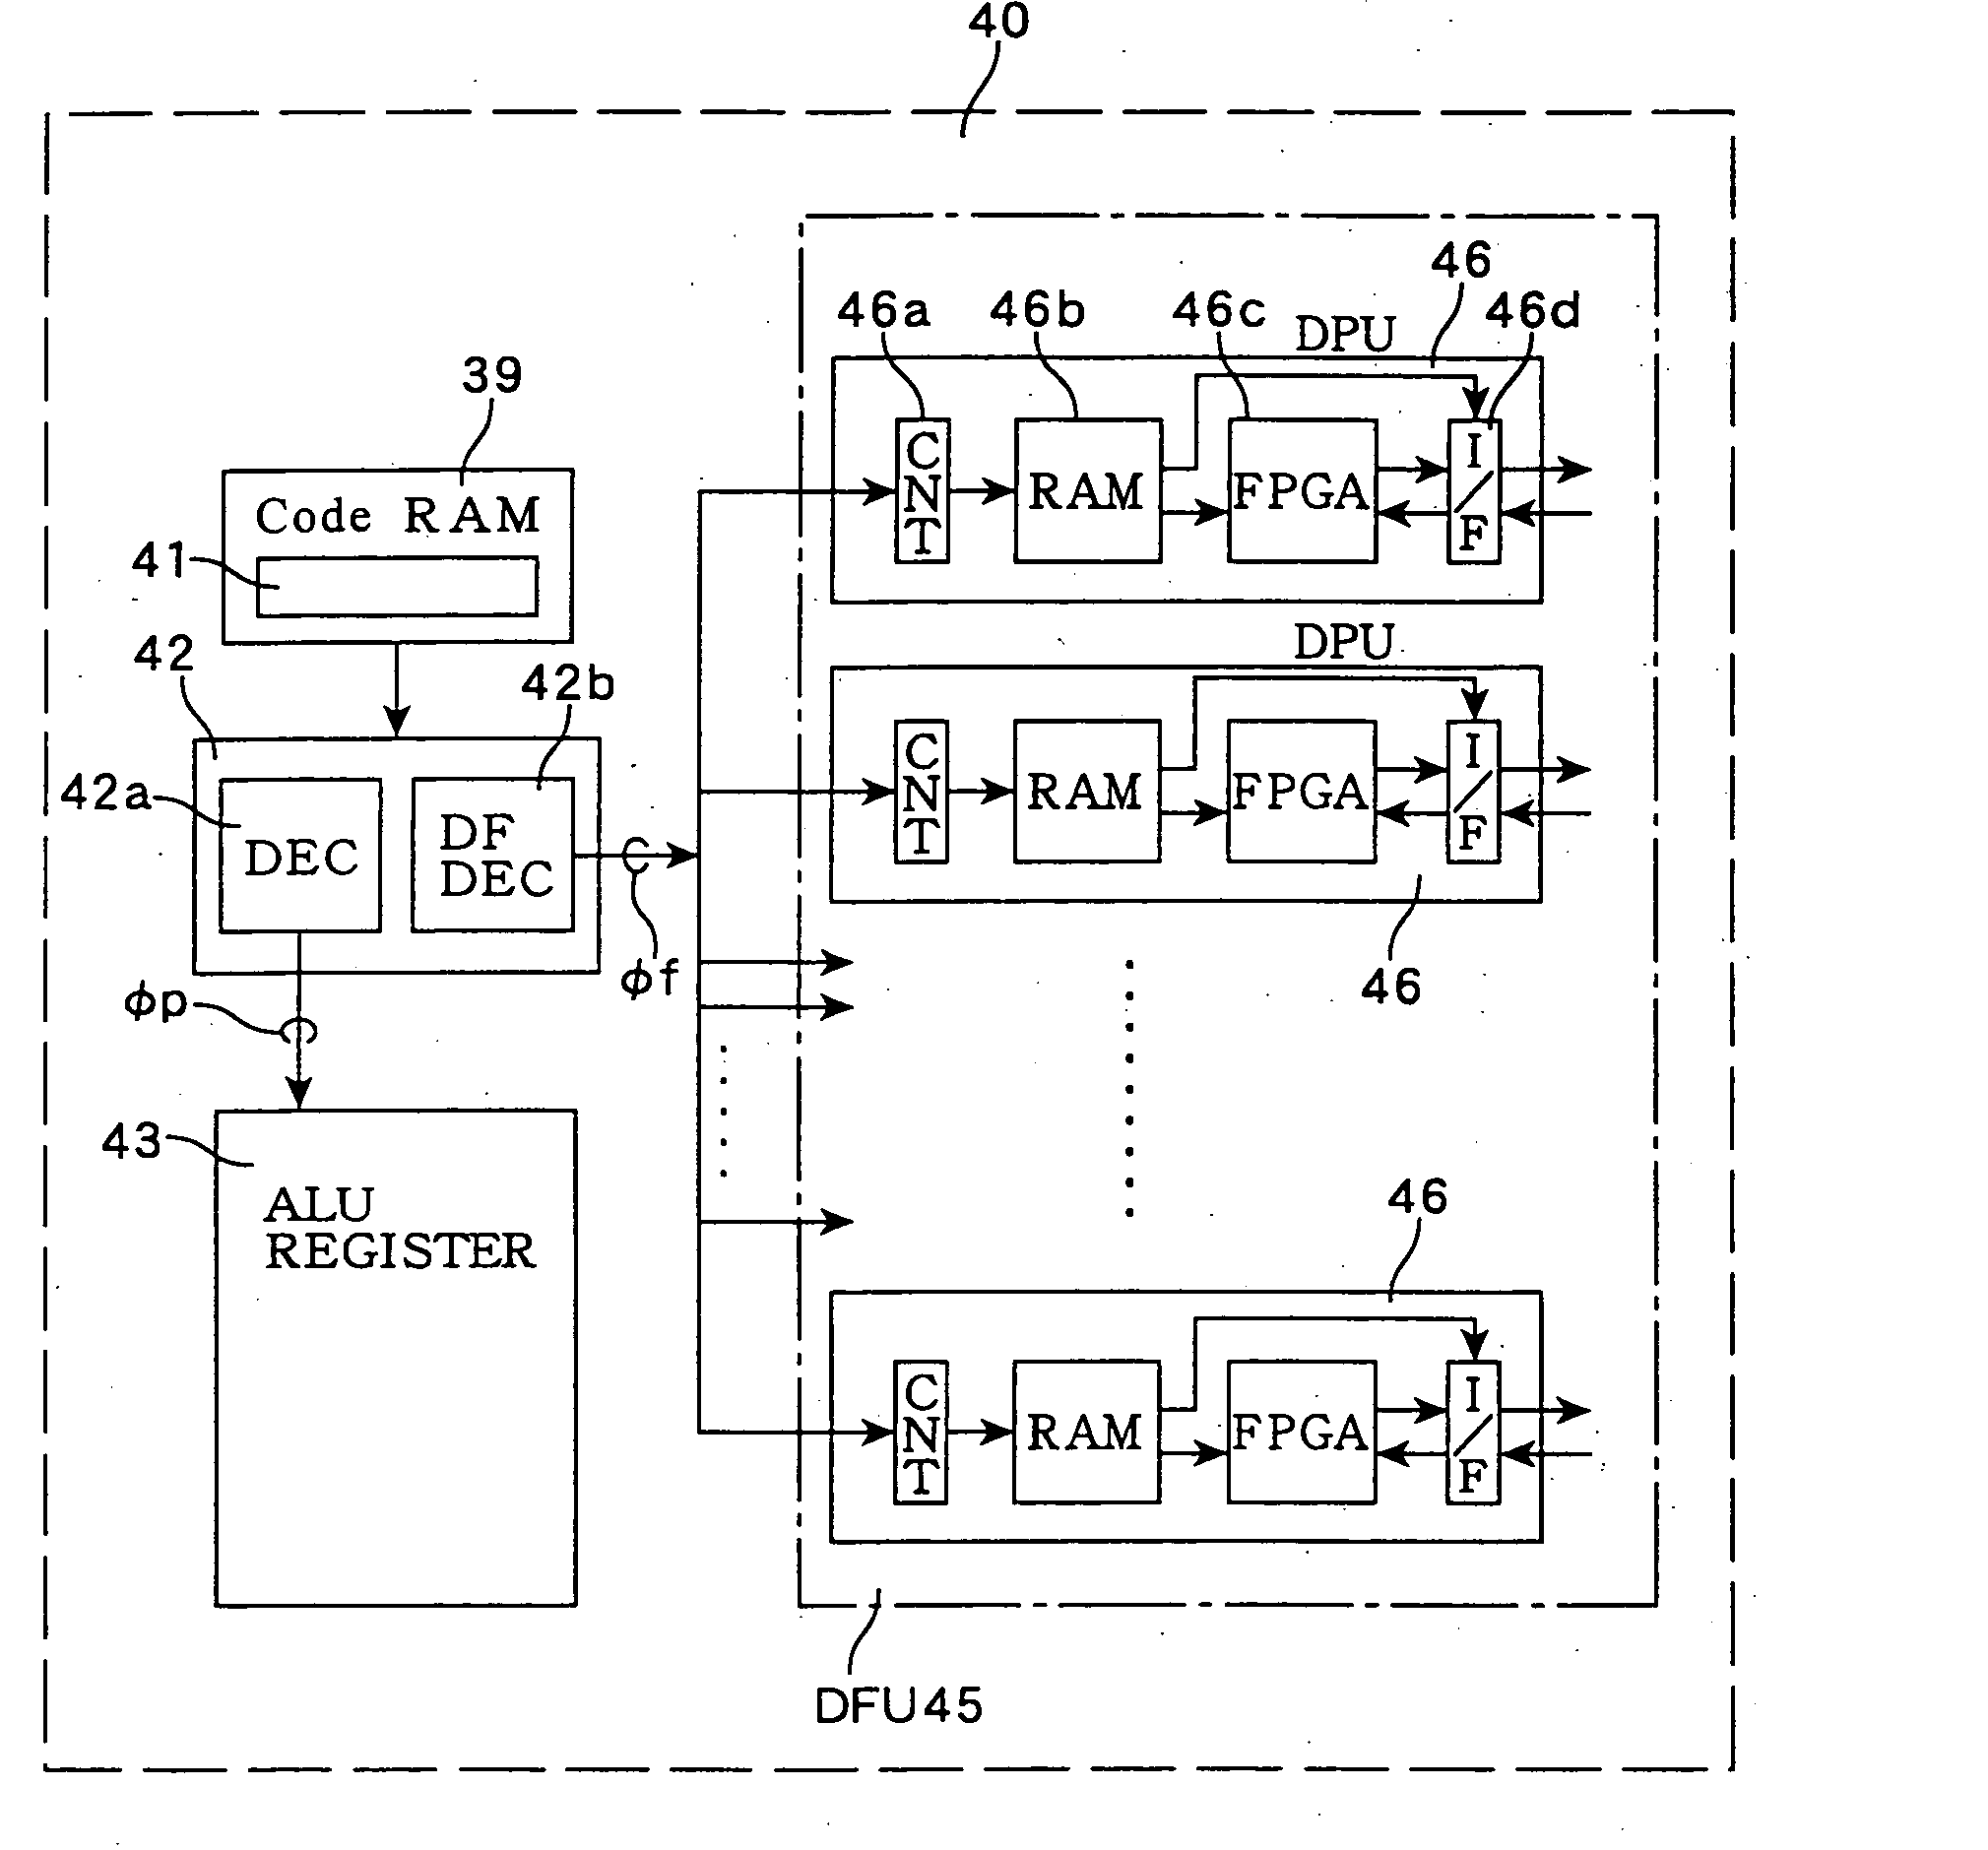 Program product and data processing system